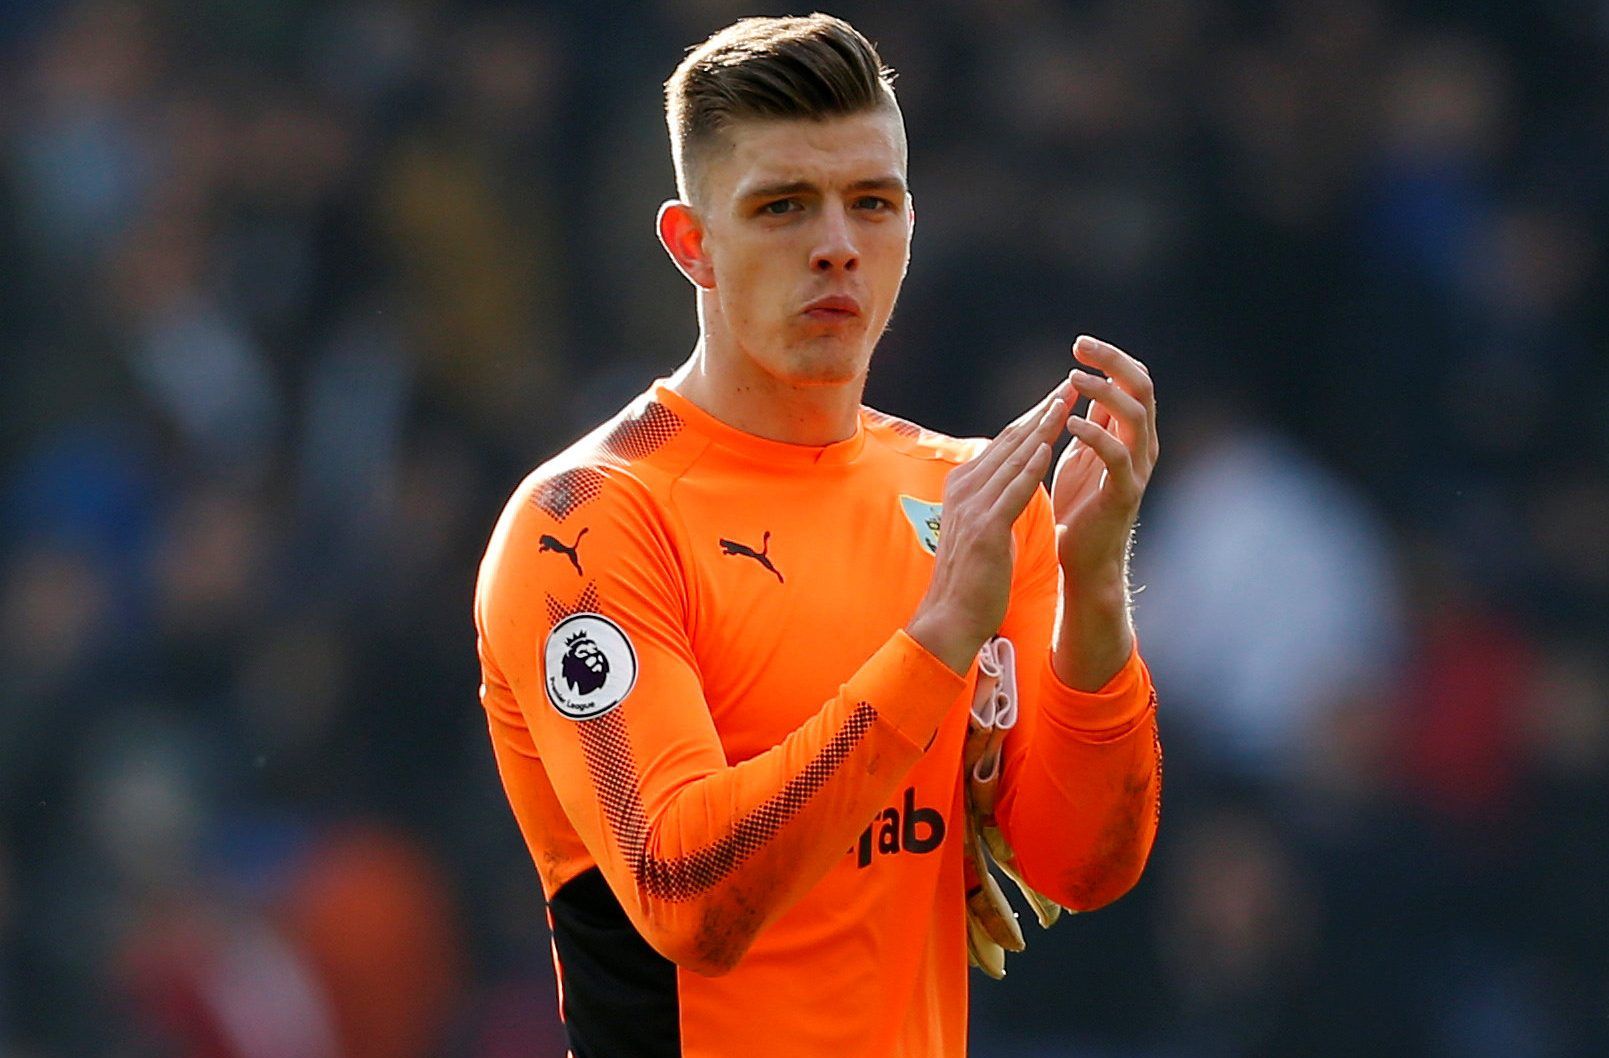 Soccer Football - Premier League - Burnley vs Leicester City - Turf Moor, Burnley, Britain - April 14, 2018   Burnley's Nick Pope applauds the fans after the match   Action Images via Reuters/Ed Sykes    EDITORIAL USE ONLY. No use with unauthorized audio, video, data, fixture lists, club/league logos or 